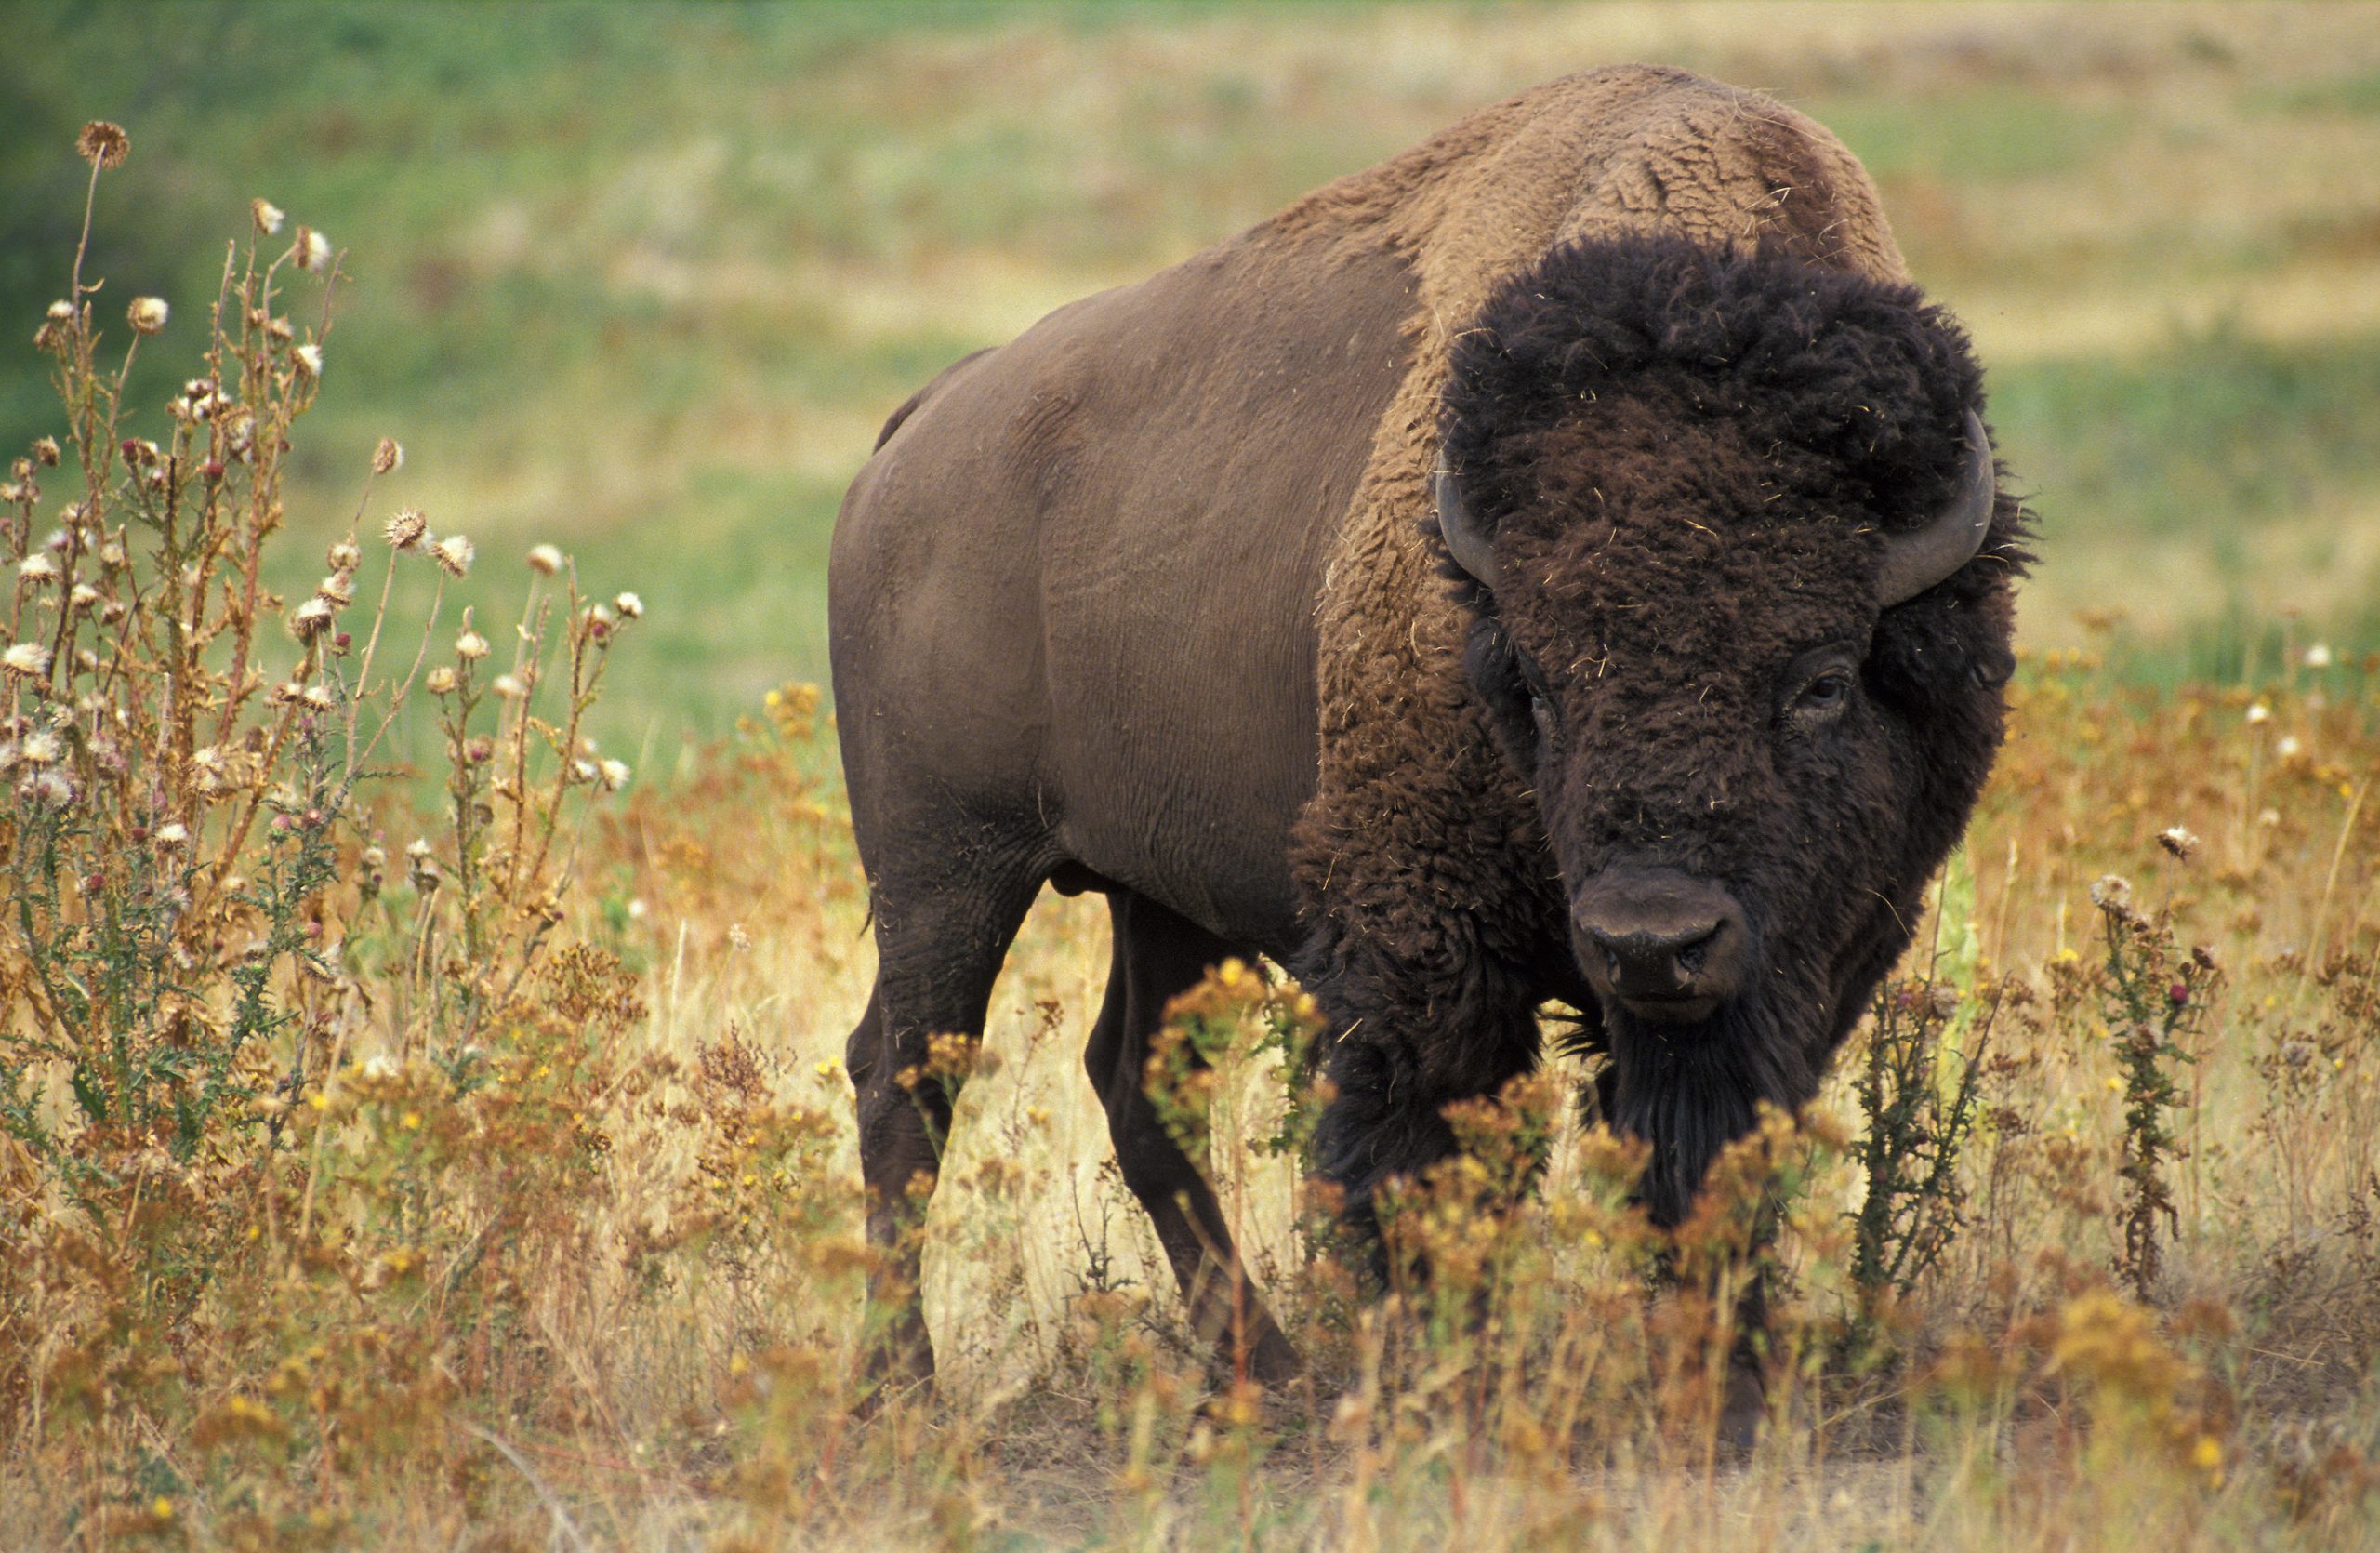 Bison in Canada: Which animal is called a Bison?